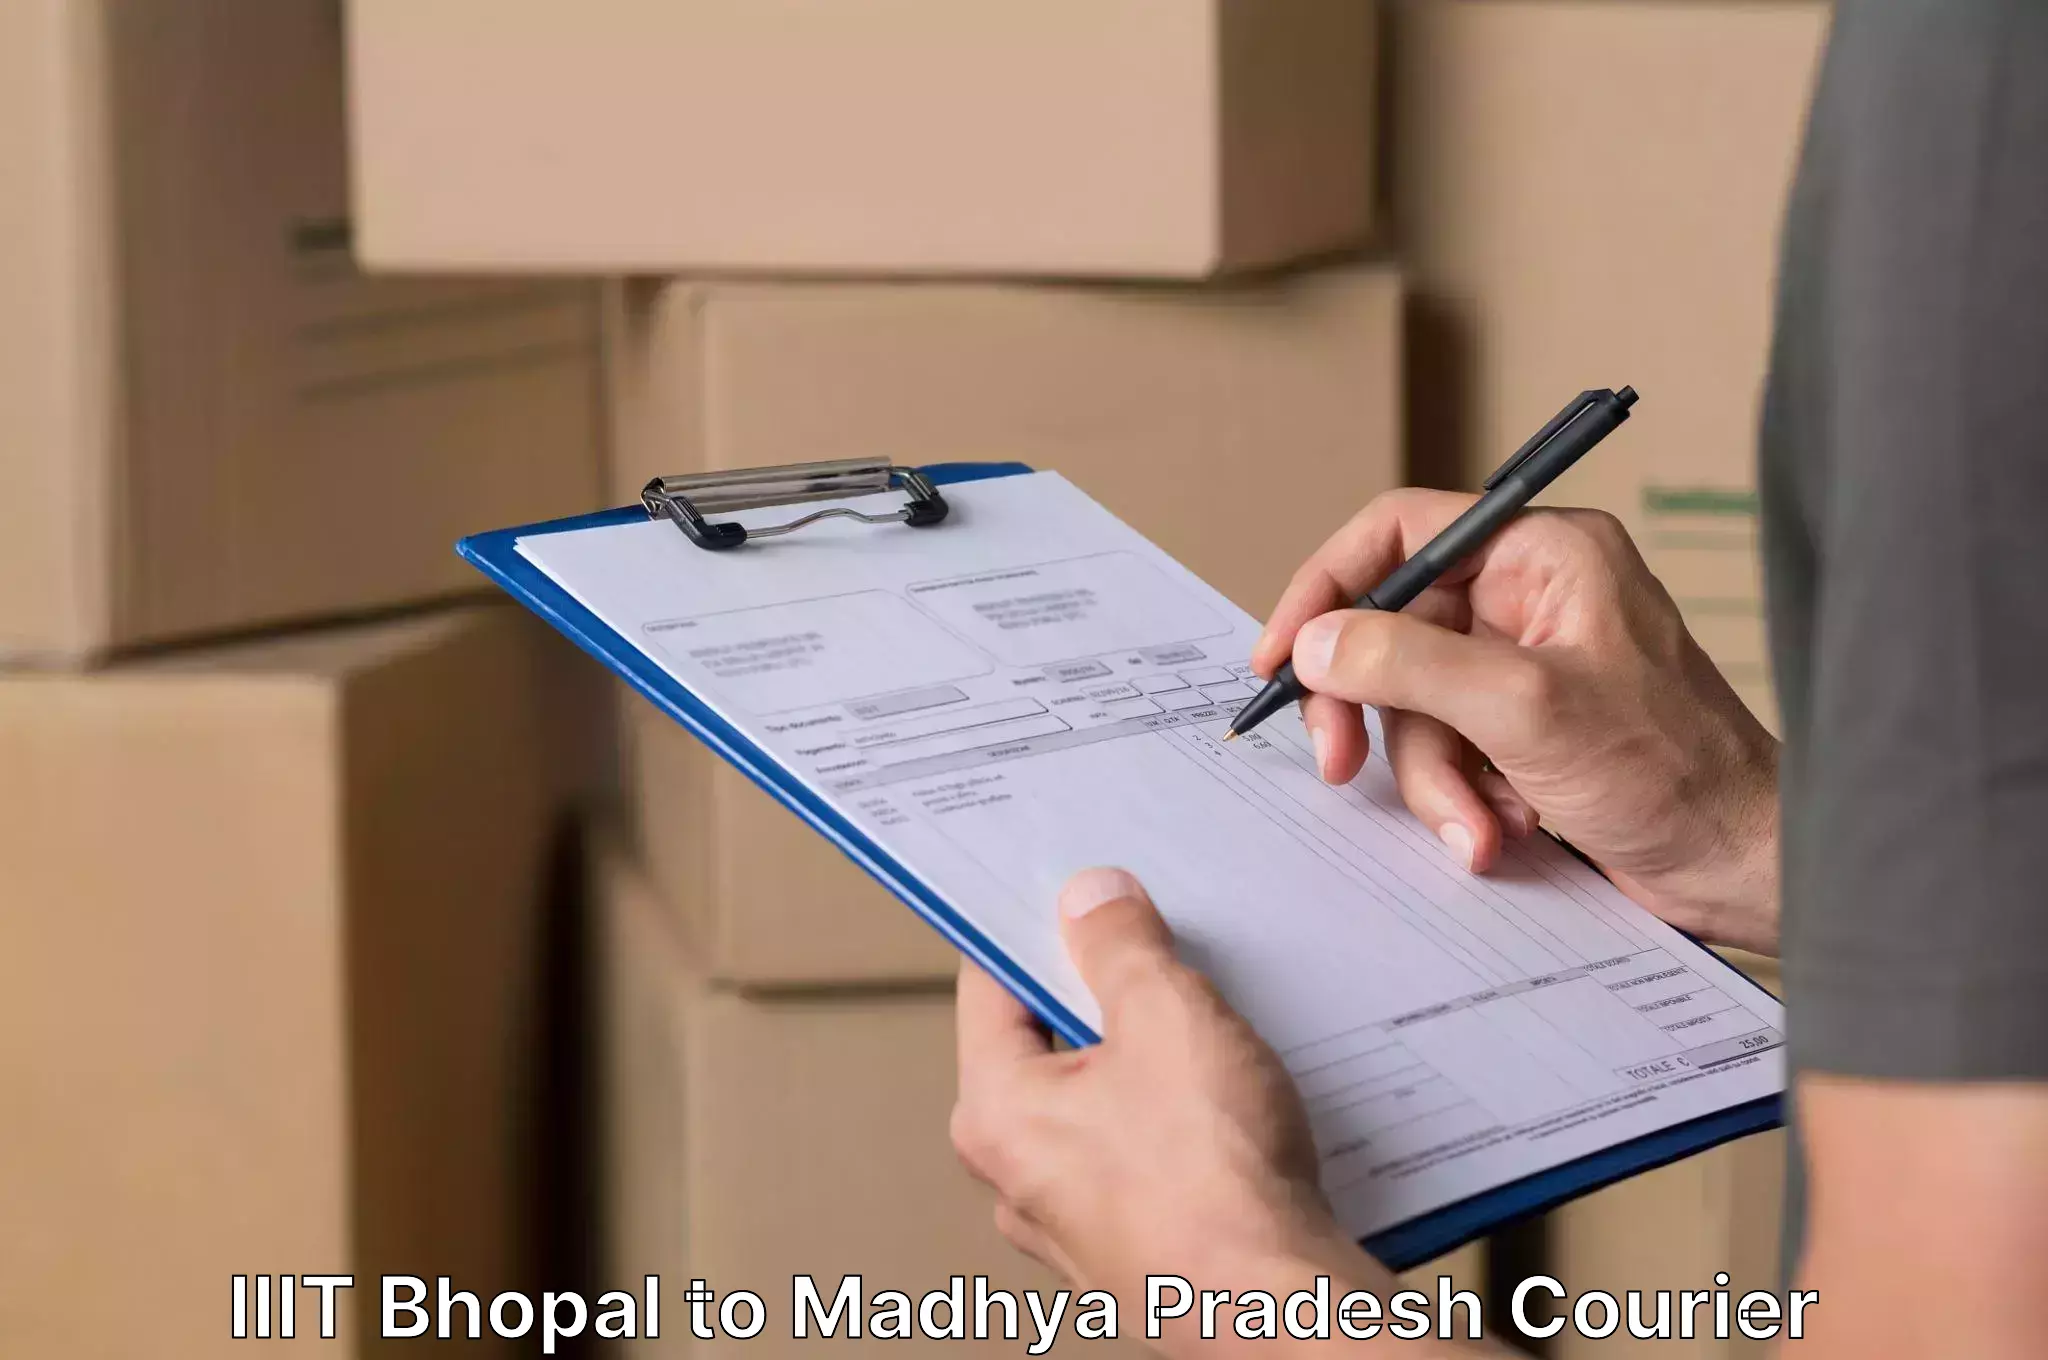 Furniture delivery service IIIT Bhopal to Bhopal